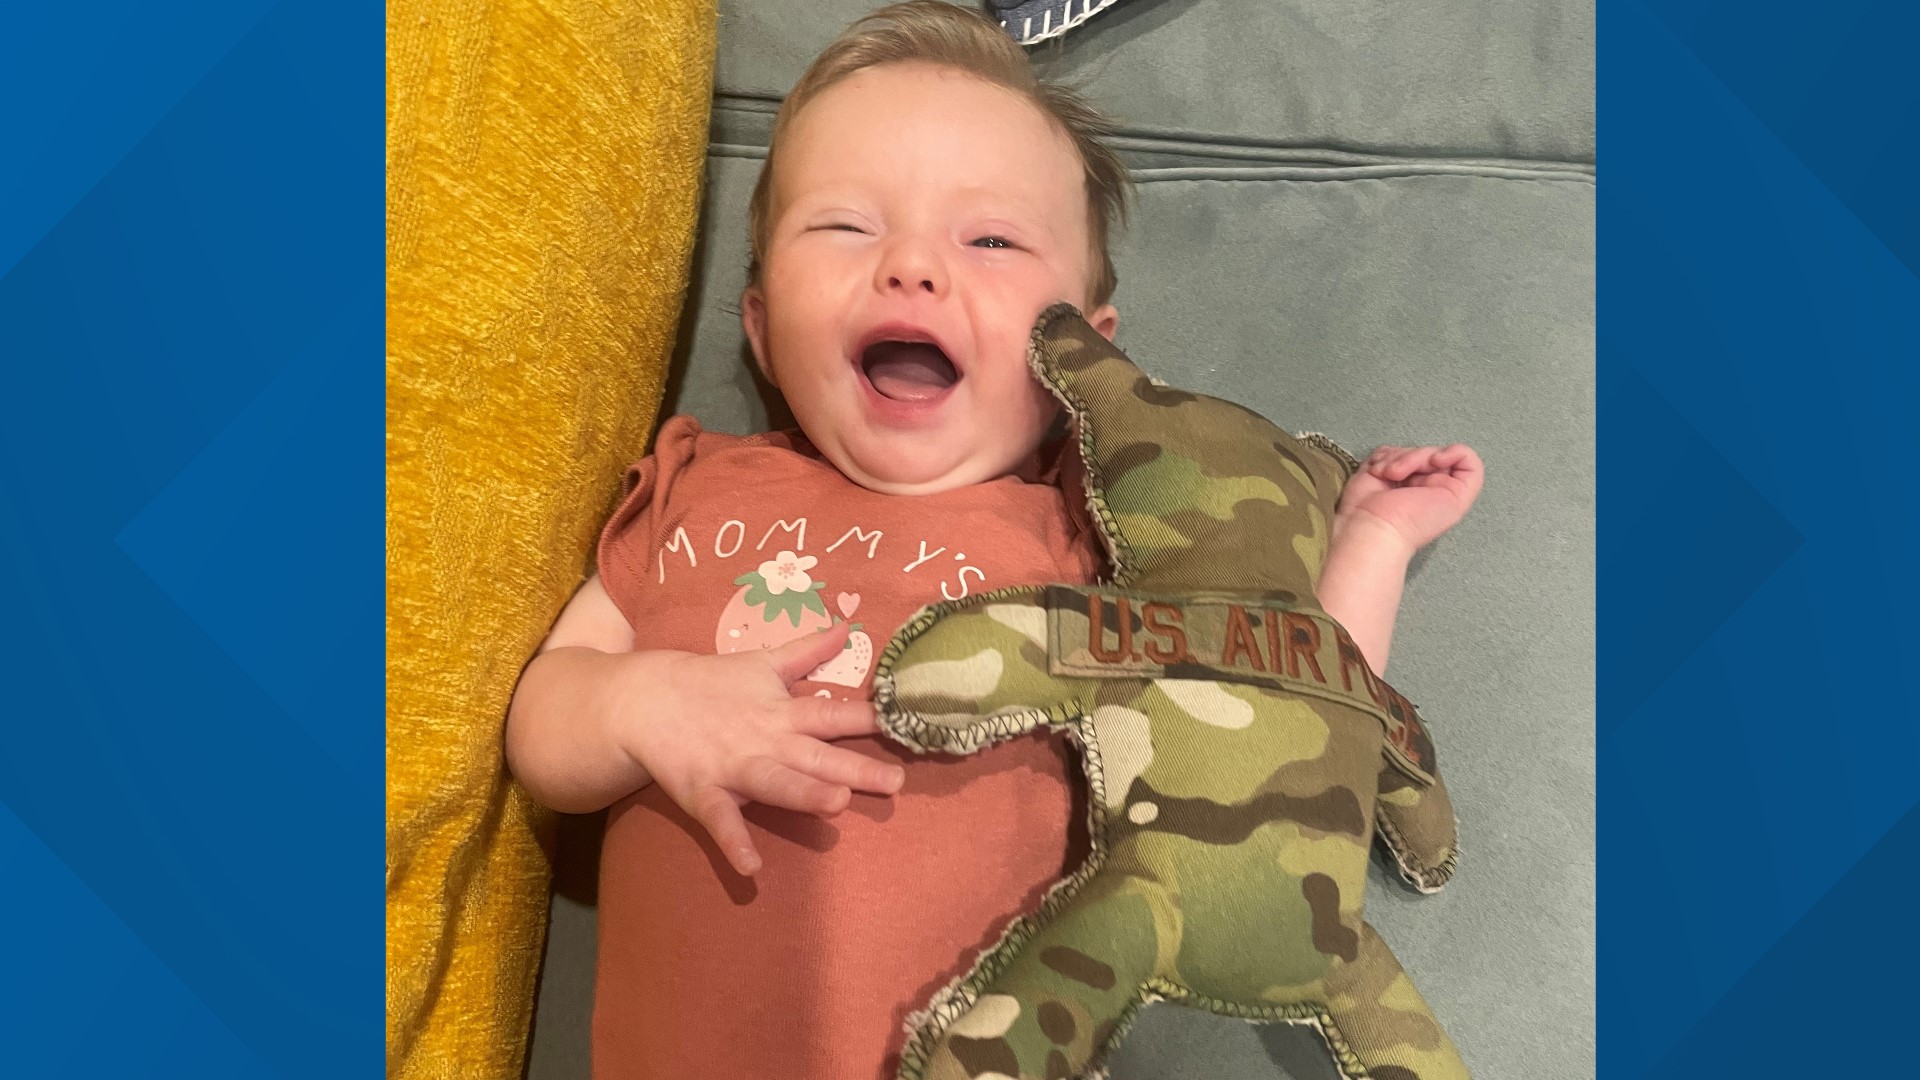 From Pennsylvania, to New York, to Florida, this military bear traveled hundreds of miles. See how social media helped a baby reunite with her bear.